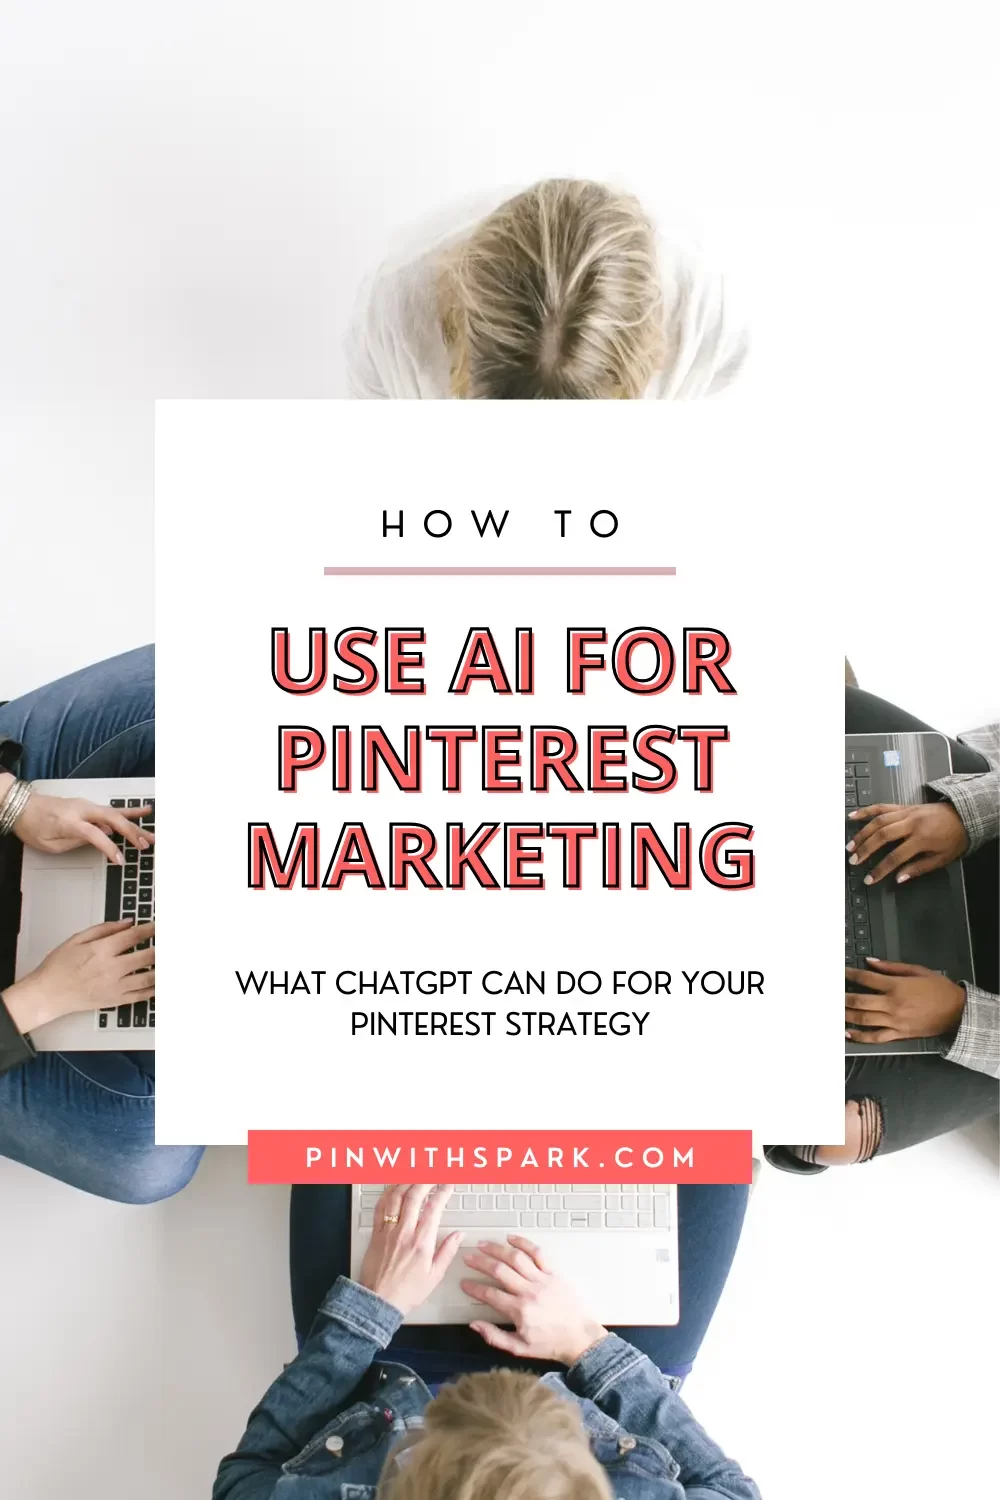 How to use AI for Pinterest marketing woman seated in circle working on open laptops pinwithspark.com